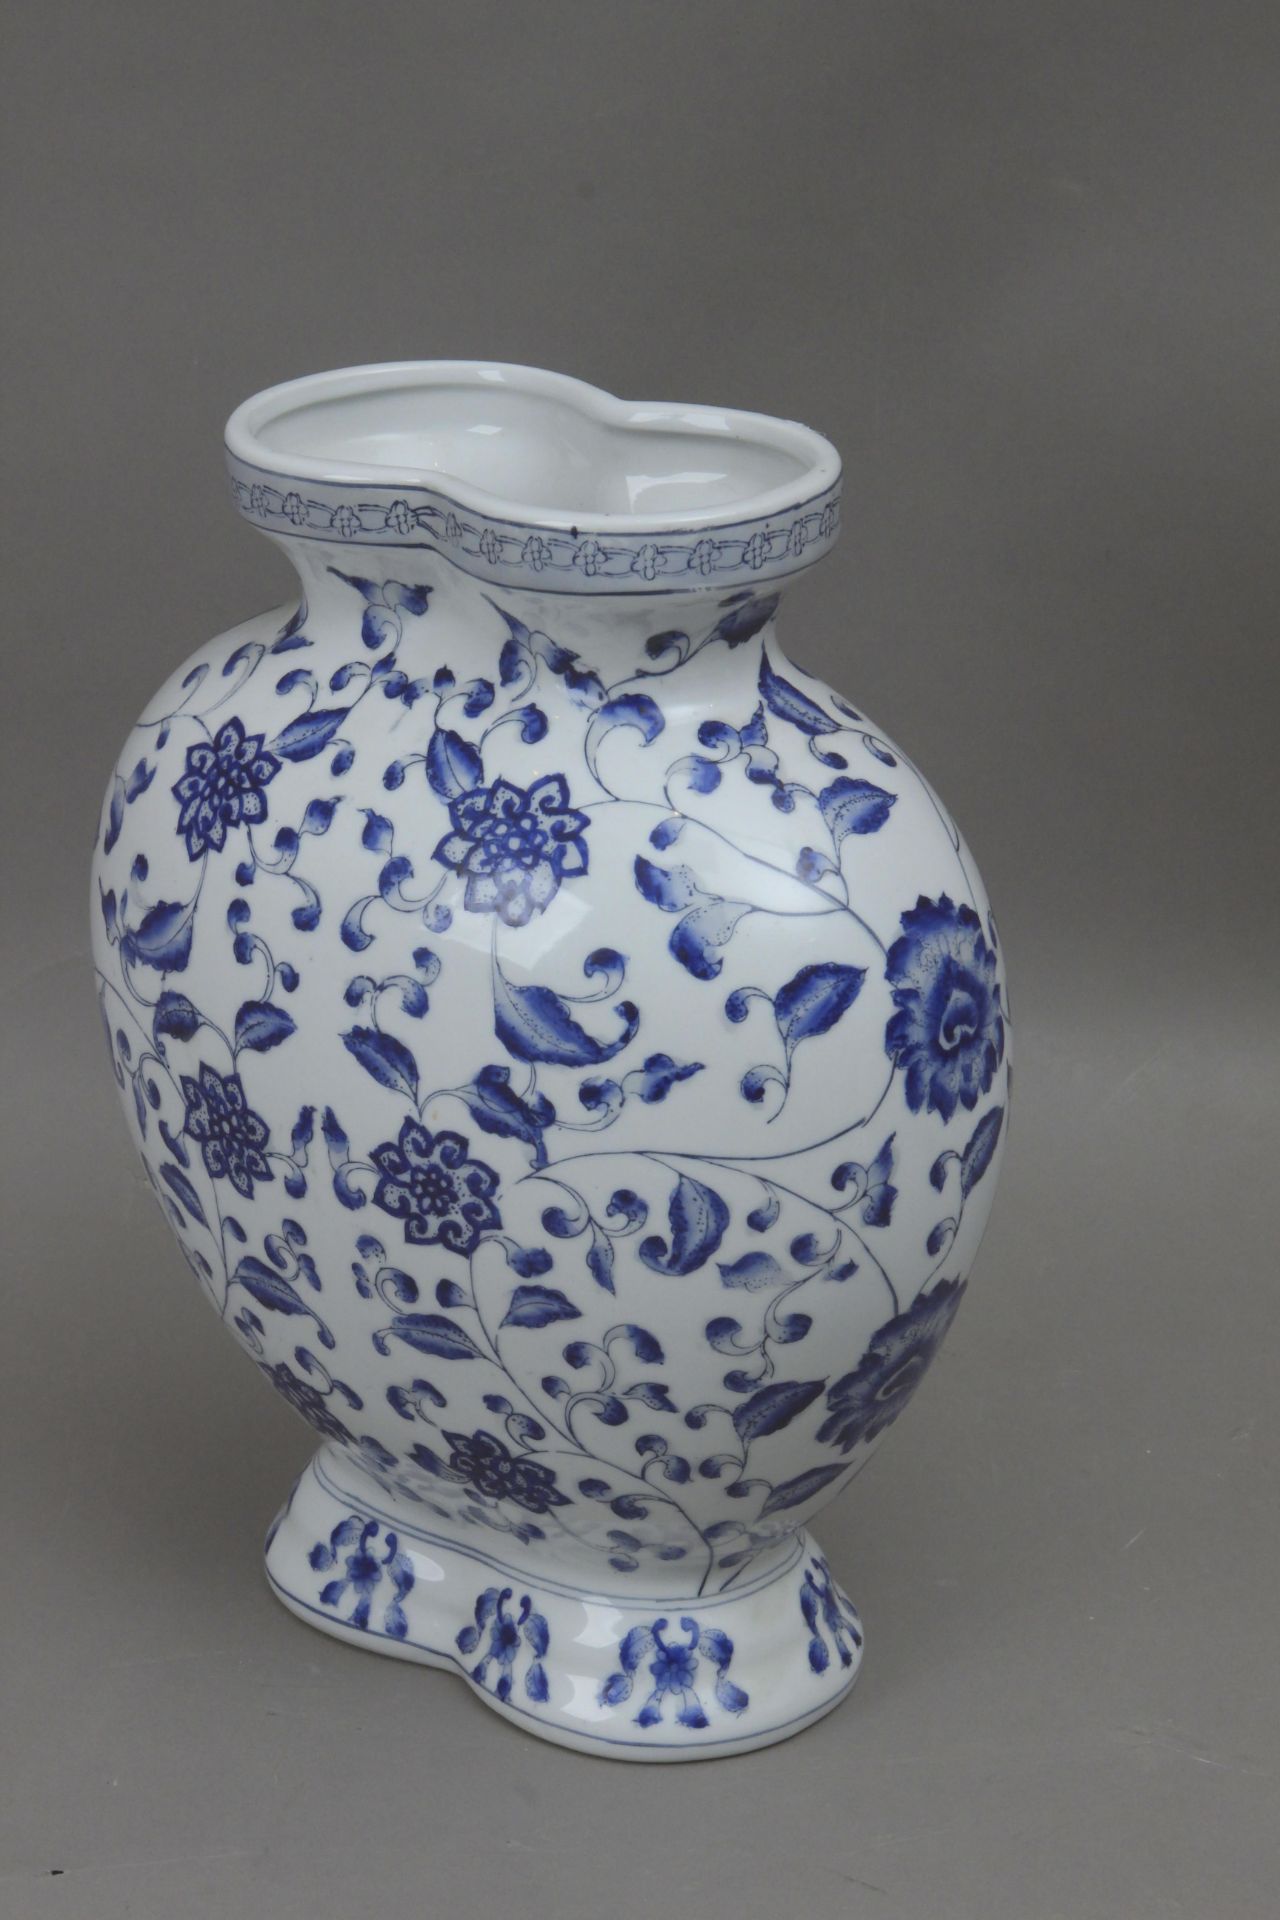 A 19th century Chinese porcelain vase